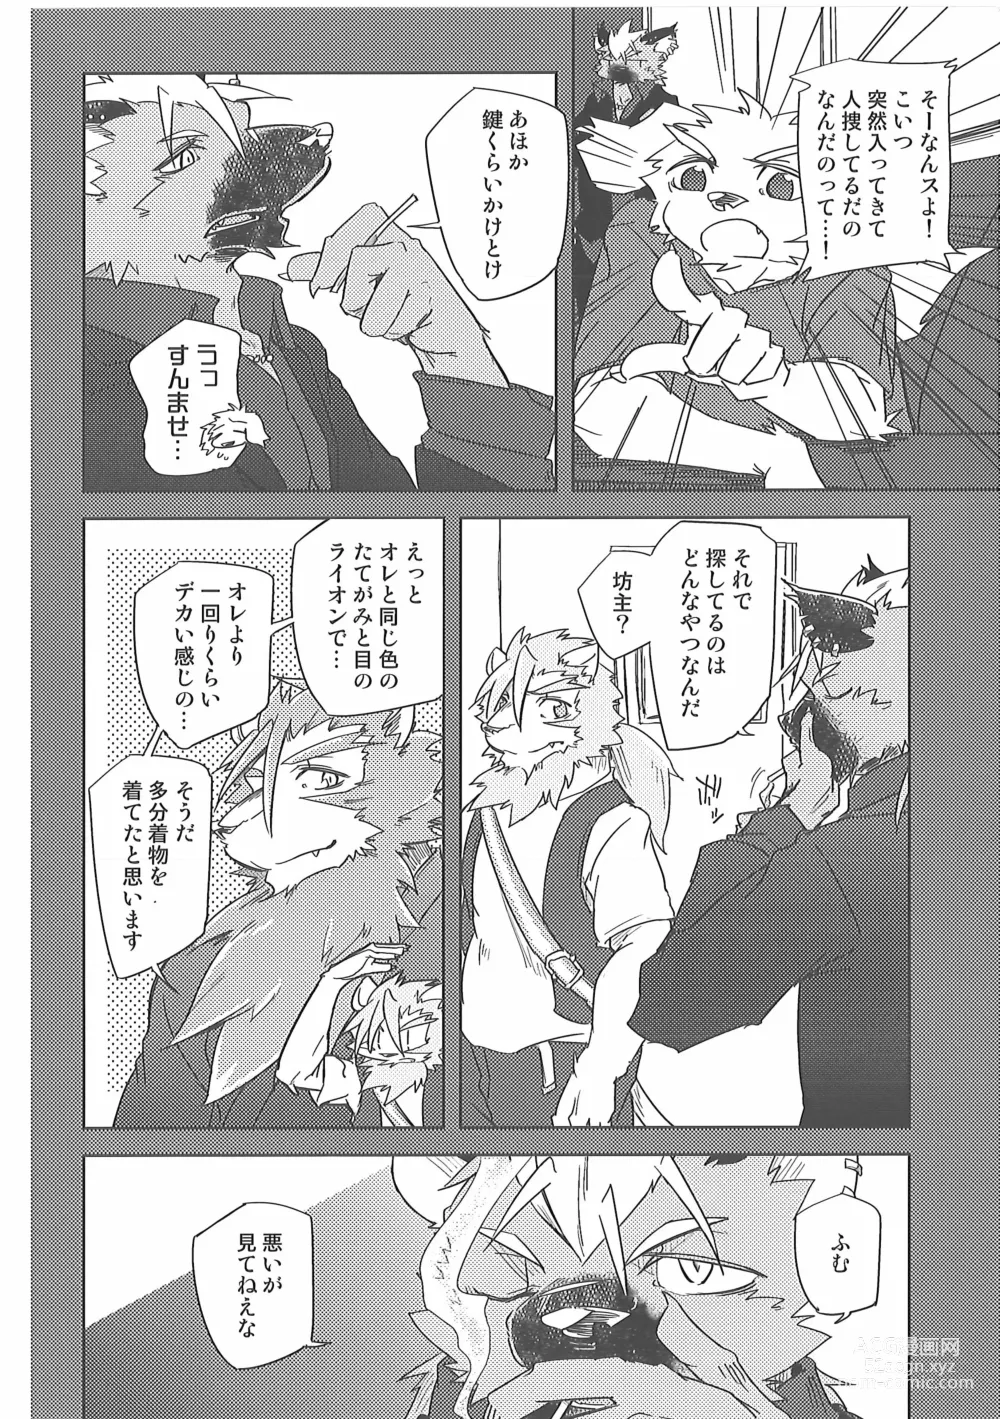 Page 4 of doujinshi Water under The Bridge 2